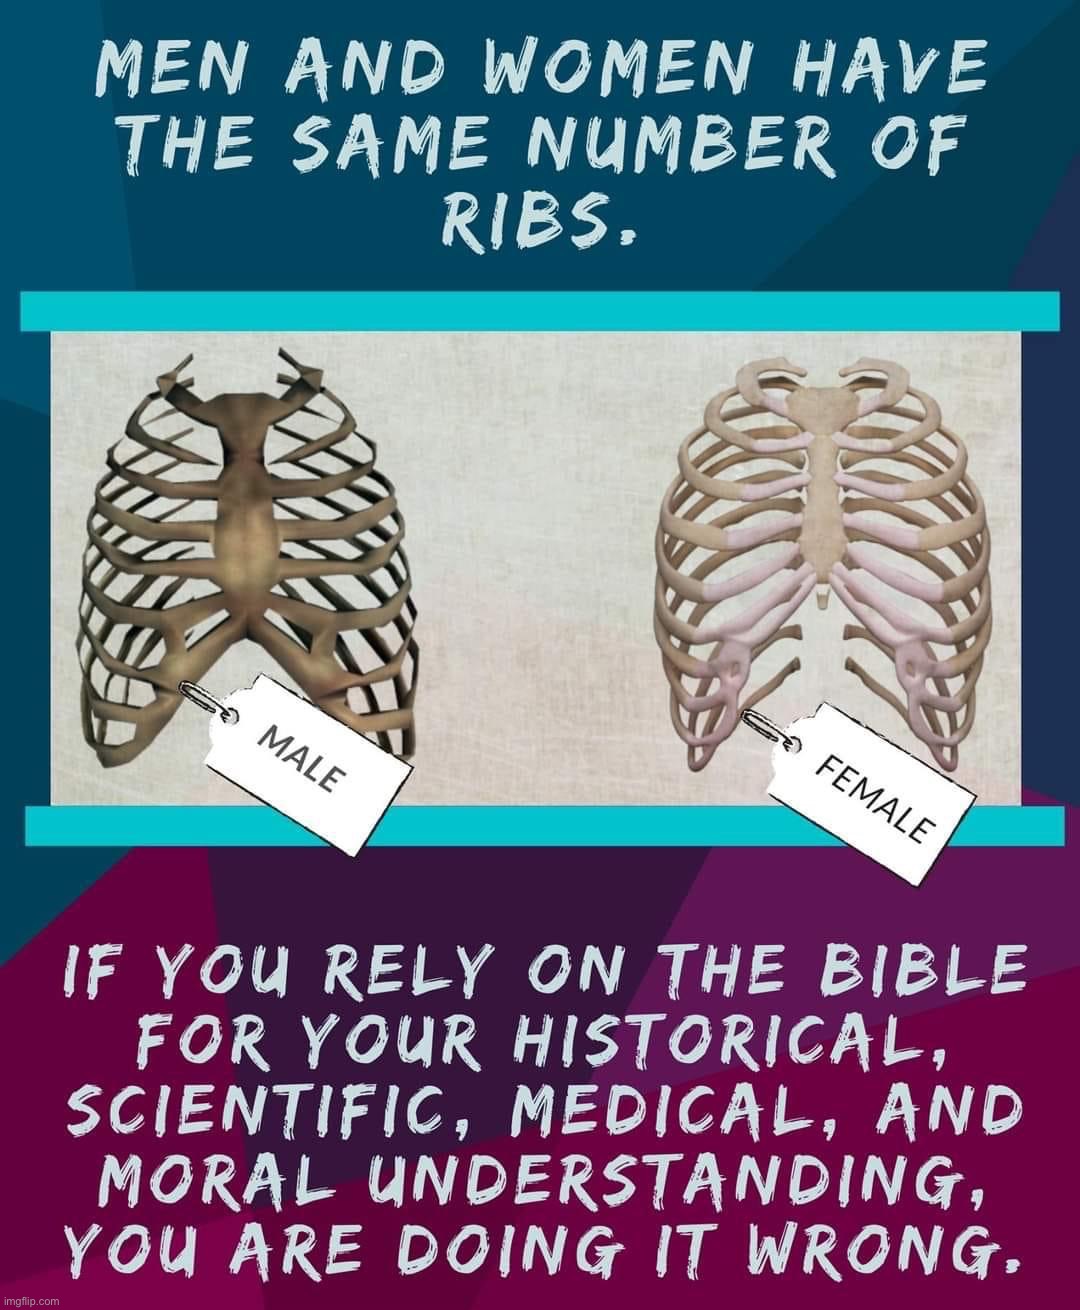 Men and women have the same number of ribs | image tagged in men and women have the same number of ribs | made w/ Imgflip meme maker